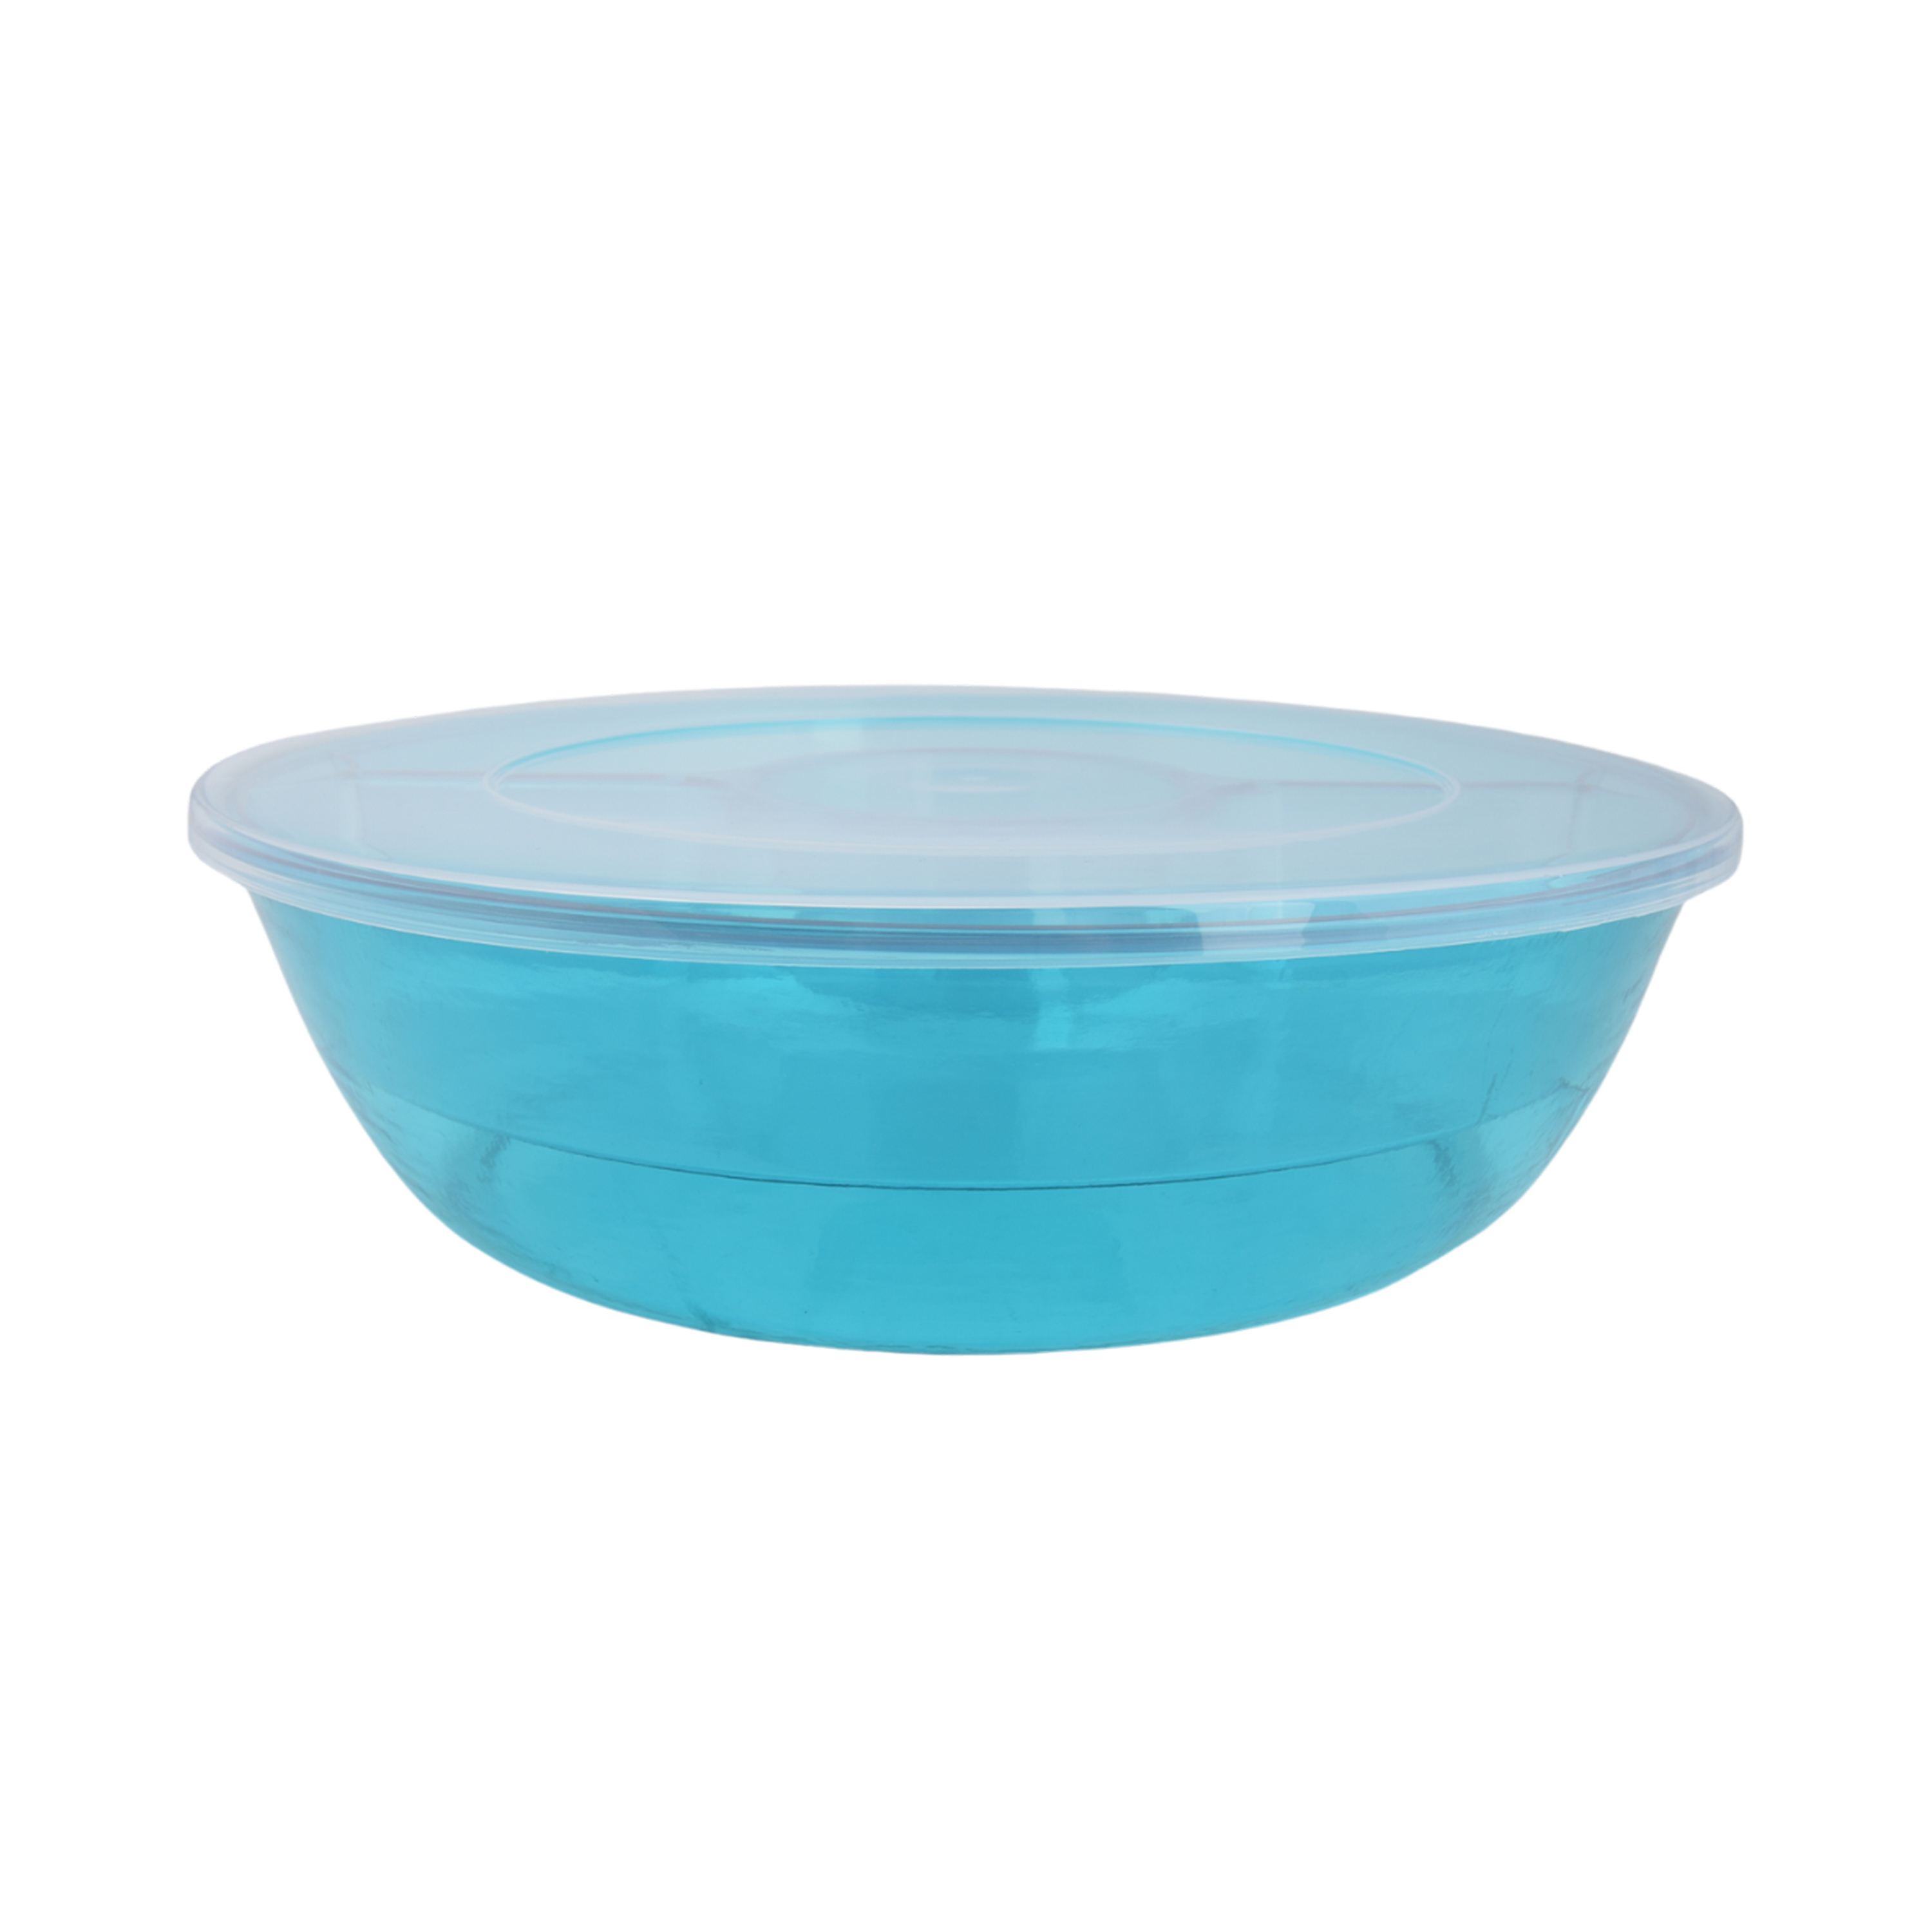 Mainstays Acrylic Appetizer On Ice Serving Tray with Lid, Blue - image 3 of 8